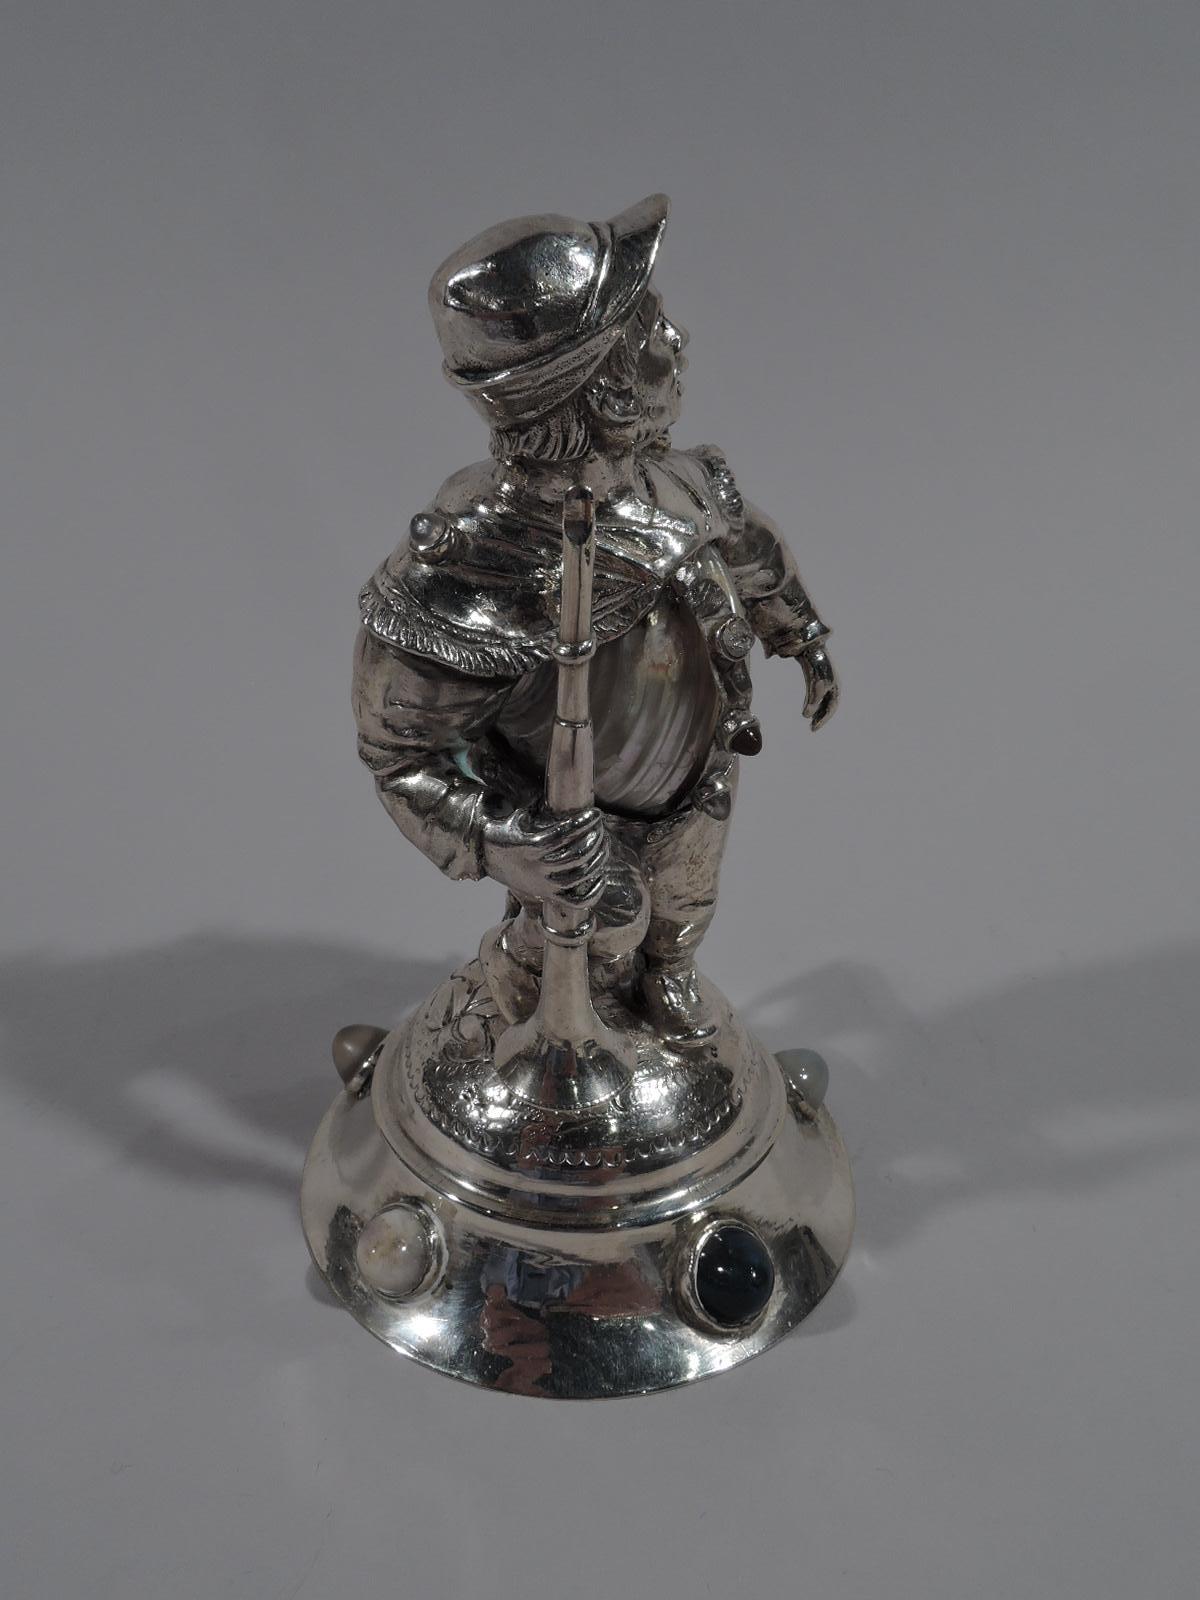 German 800 silver figurine, circa 1890. A shepherd boy holding a horn twists around in search of the stray lamb nuzzling his leg. Loose country garb reveals mother of pearl belly. Raised base inset with cabochon hardstones. Gentle humor with